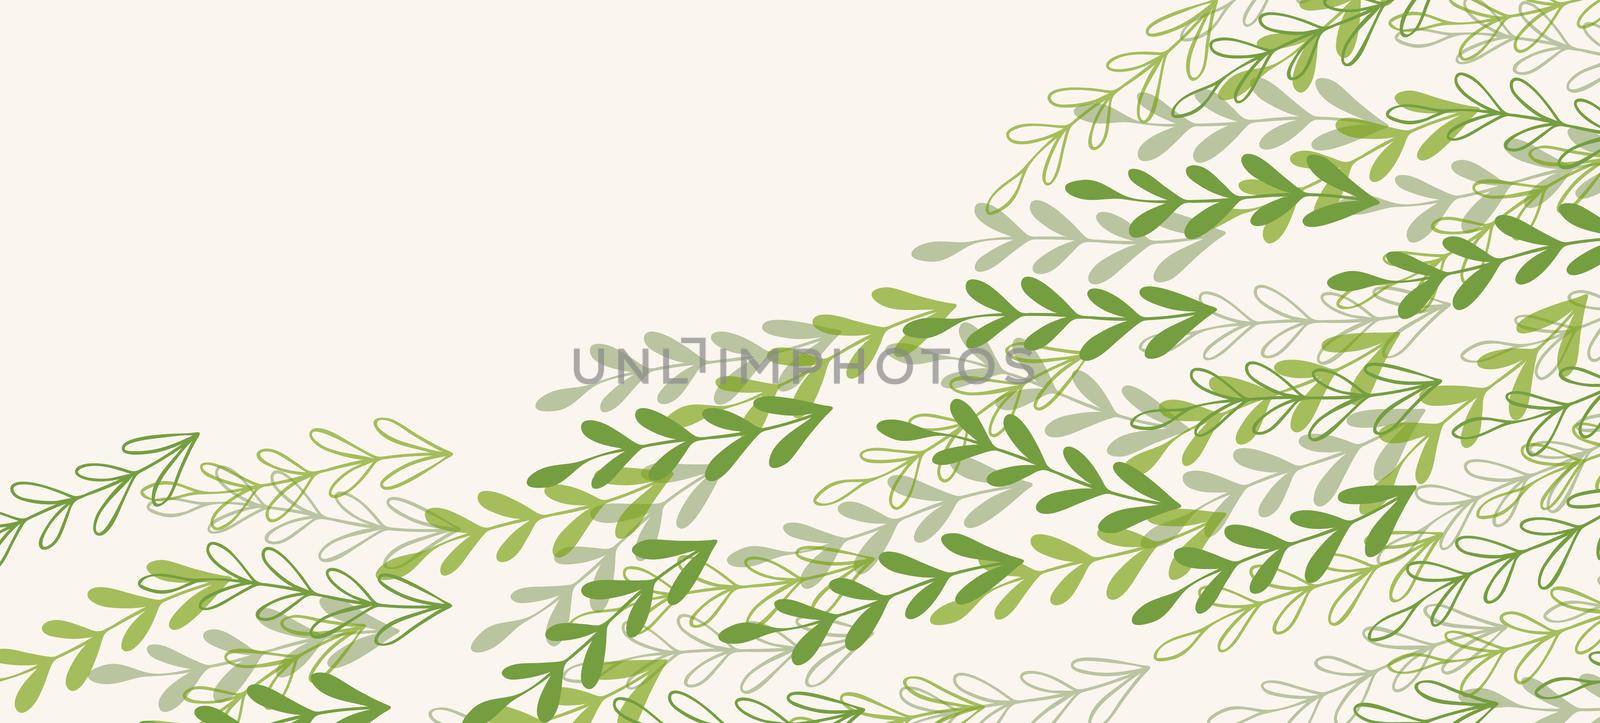 Floral web banner with drawn color exotic leaves. Nature concept design. Modern floral compositions with summer branches. Vector illustration on the theme of ecology, natura, environment by allaku